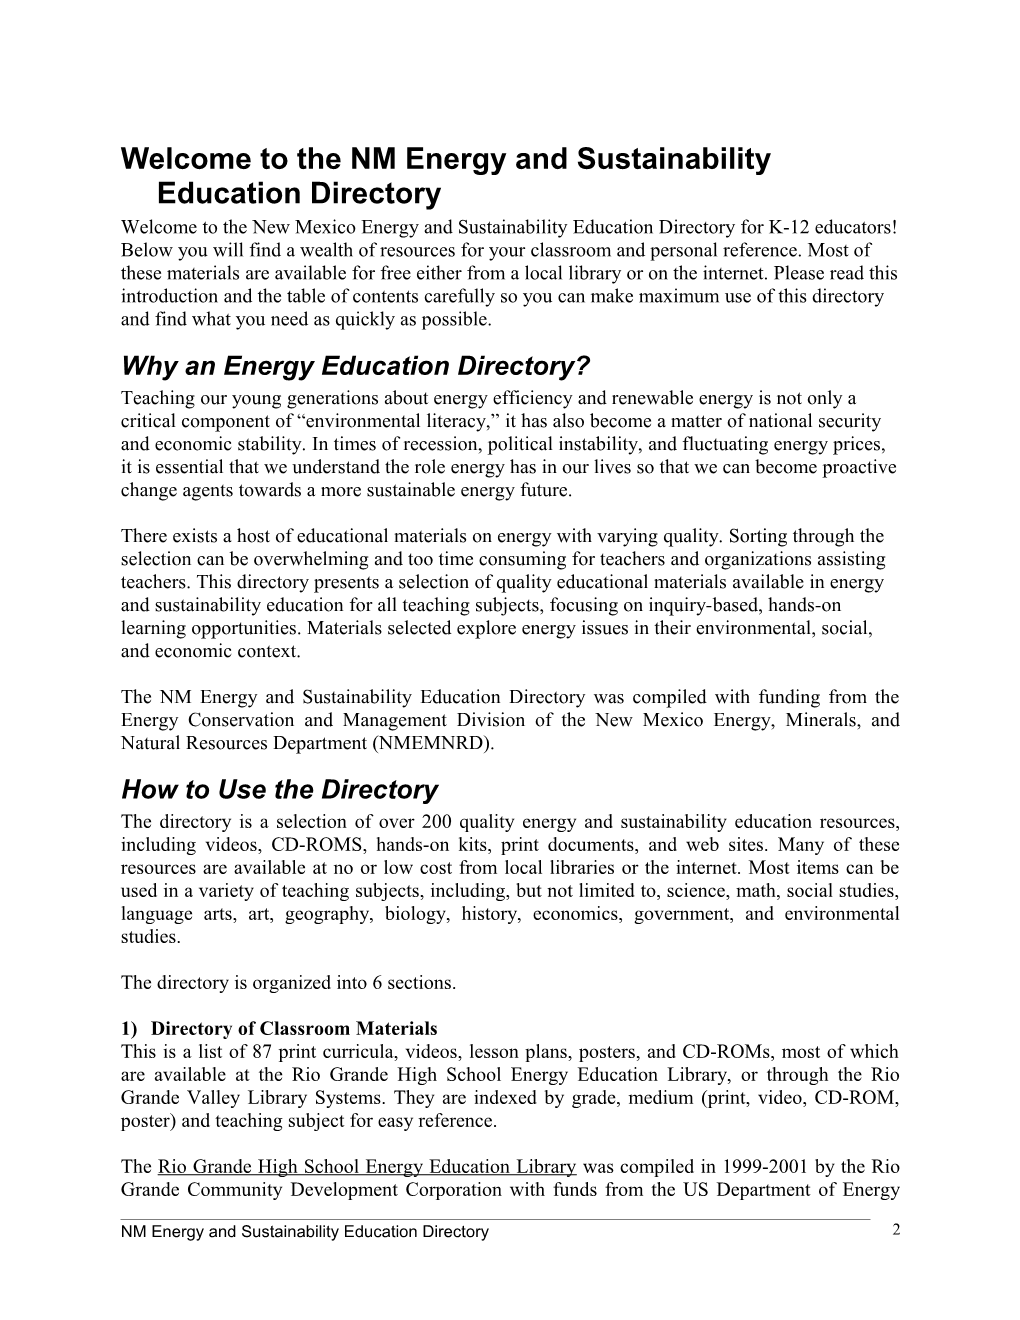 New Mexico Energy and Sustainability